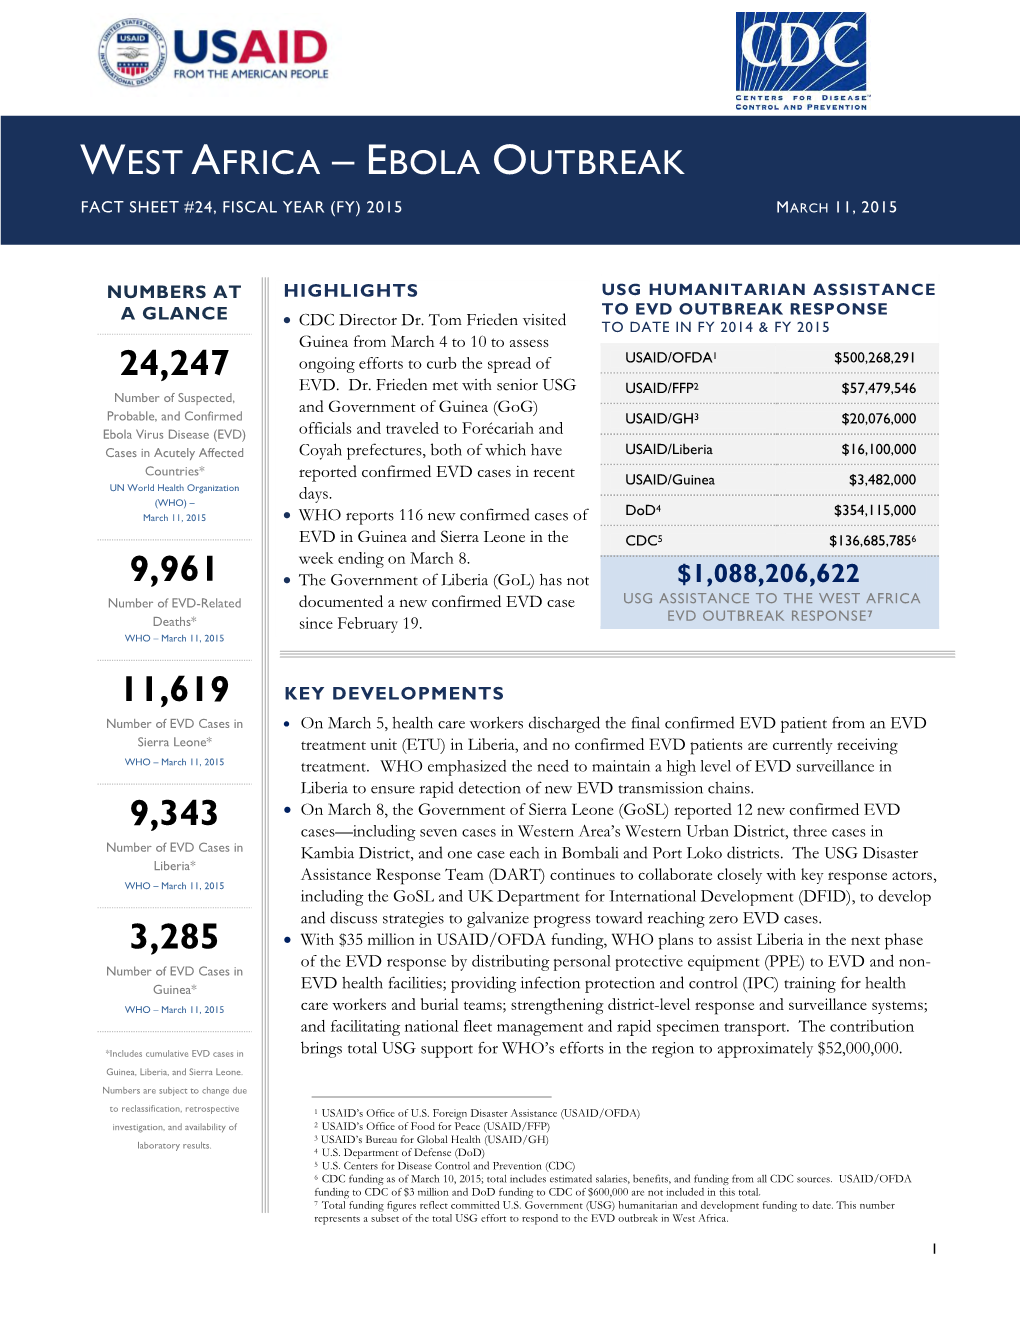 Ebola Outbreak Fact Sheet #24, Fiscal Year (Fy) 2015 March 11, 2015